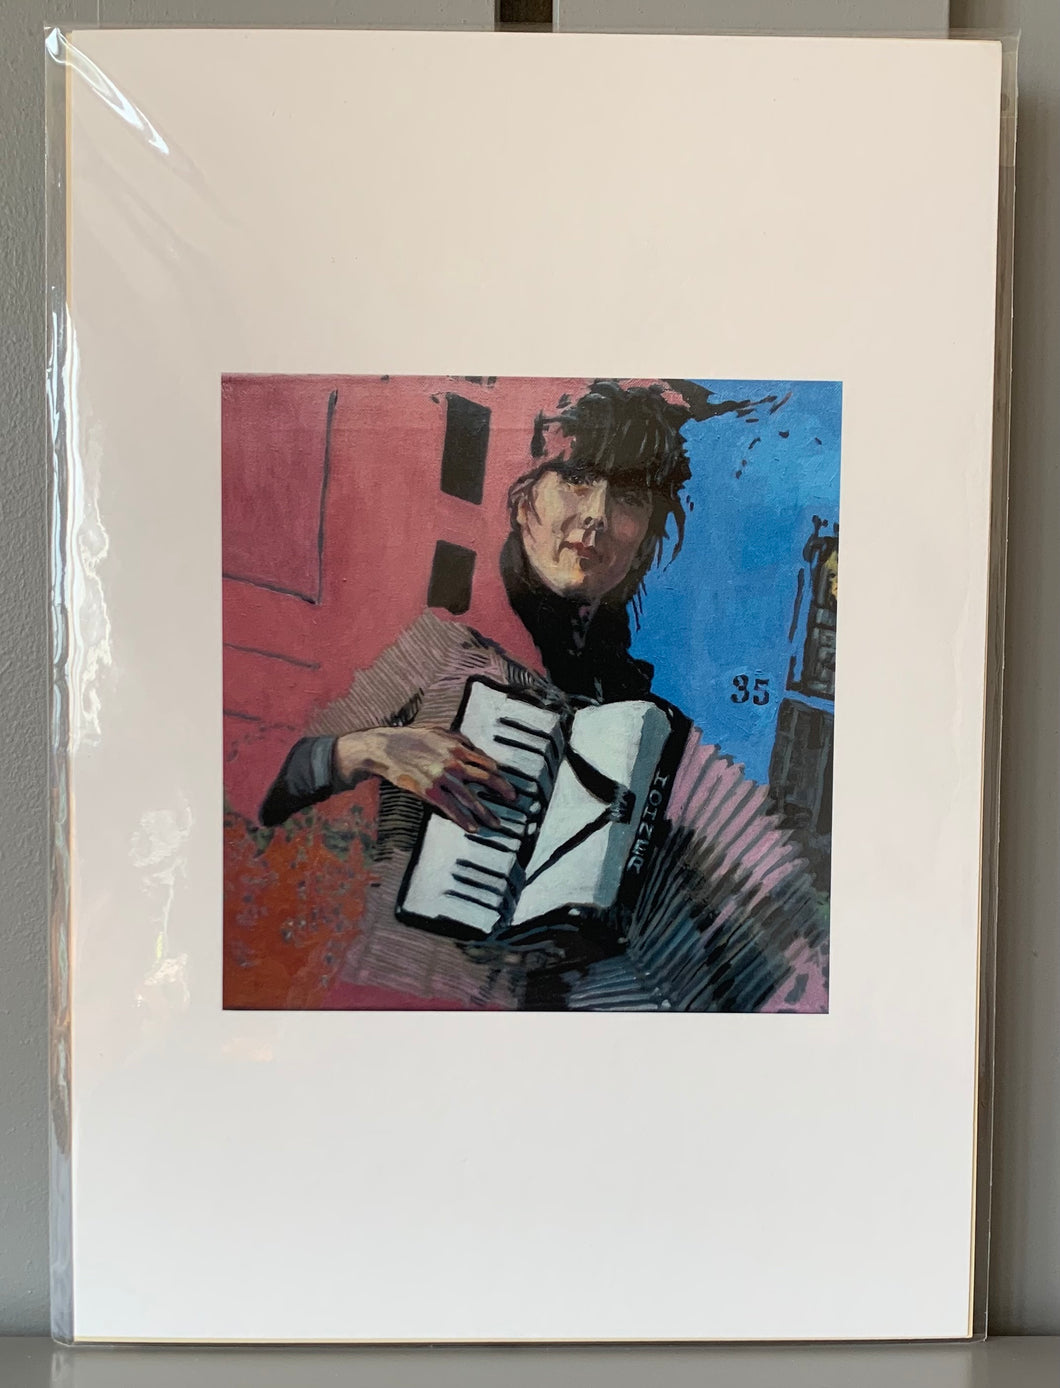 Fine art print reproduction of The Accordion Player original oil on canvas artwork by Stella Tooth musician art